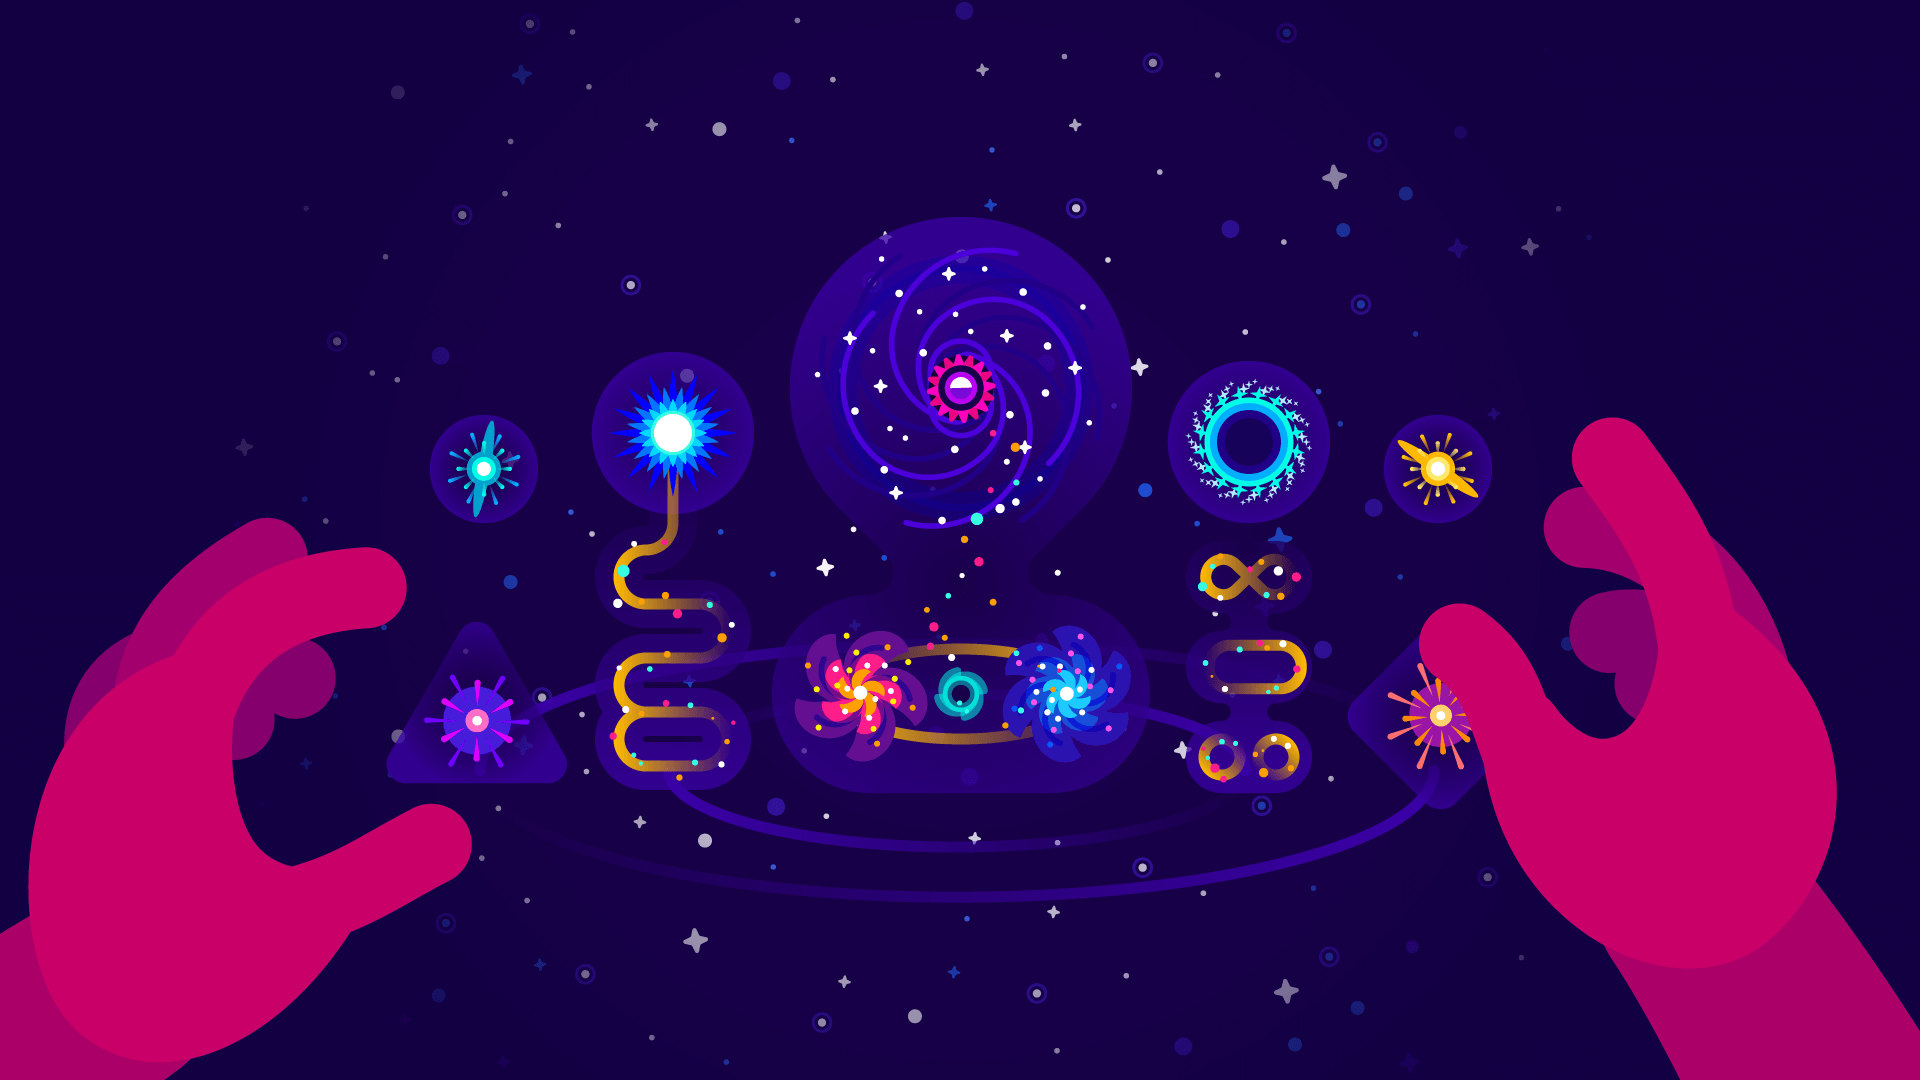 kurzgesagt-in-a-nutshell-countdown-how-many-days-until-the-next-episode